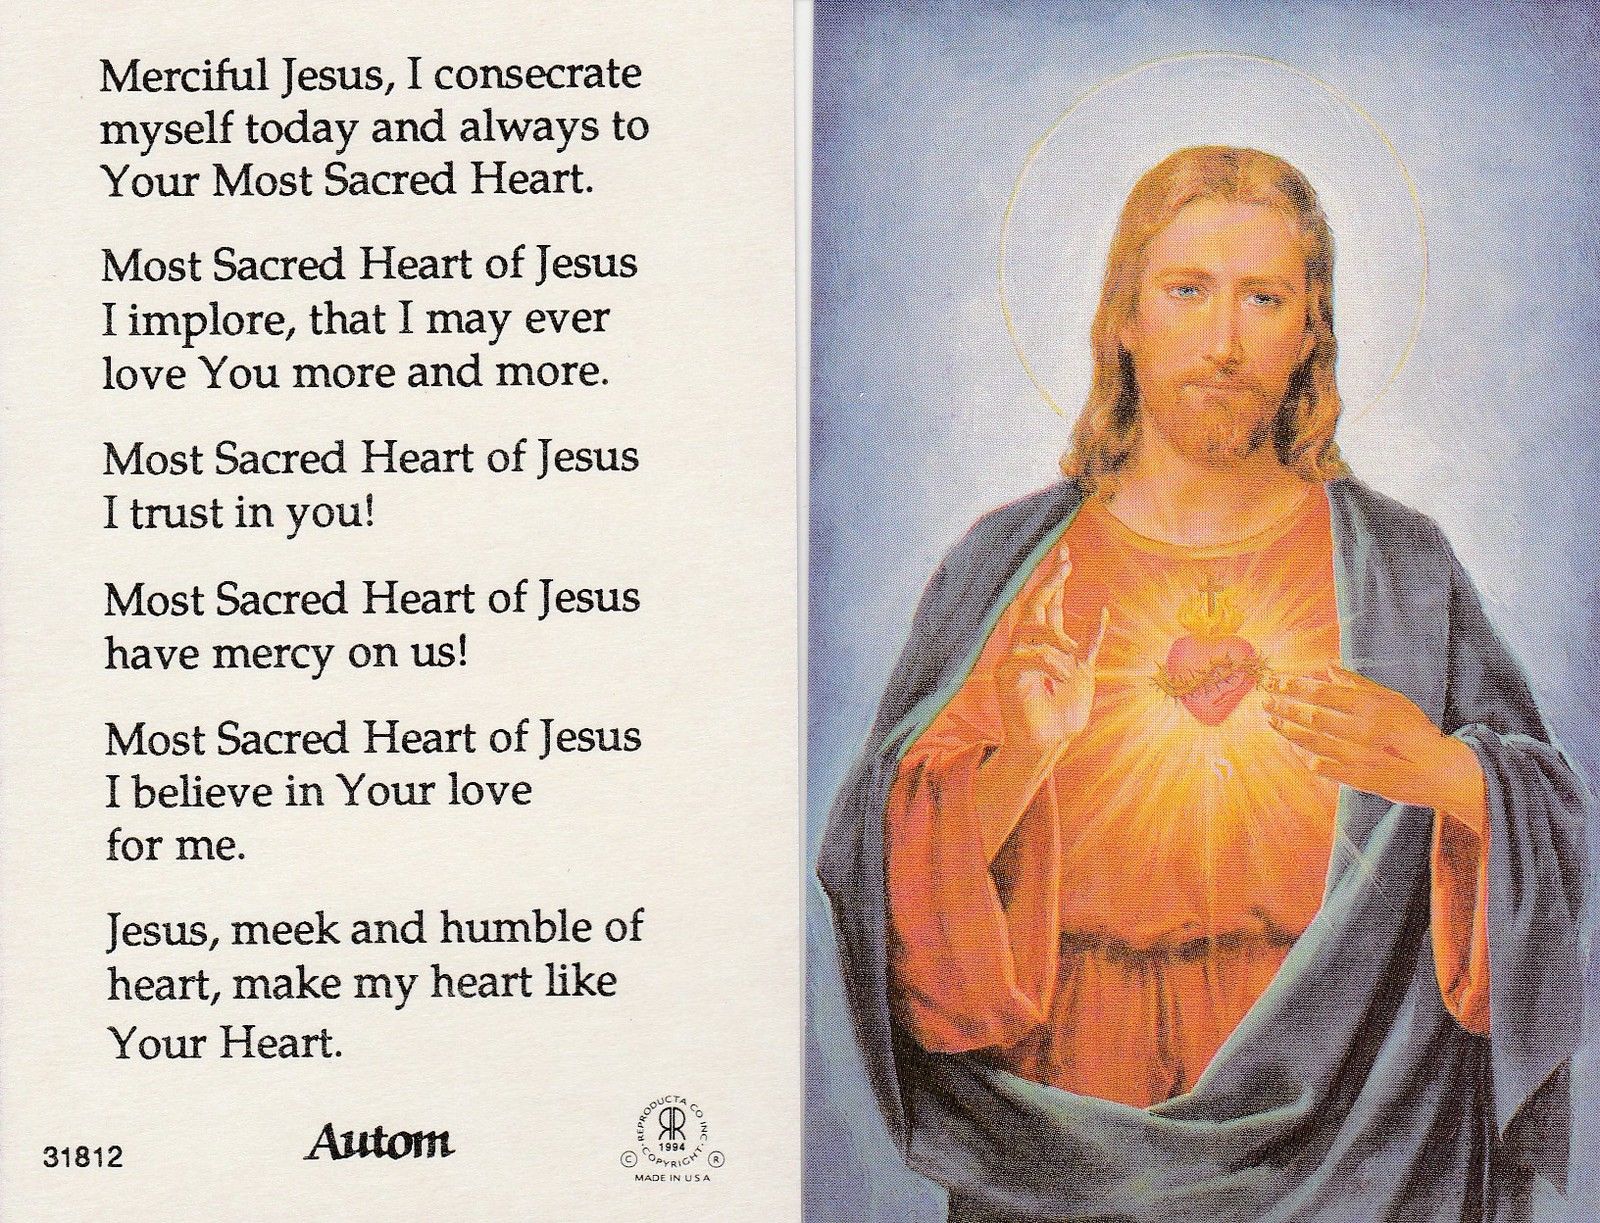 Prayer Card Merciful Jesus I Consecrate Myself Today And Always To Your Most Sacred Heart Laminated 31812 - Ysleta Mission Gift Shop- VOTED El Paso's Best Gift Shop